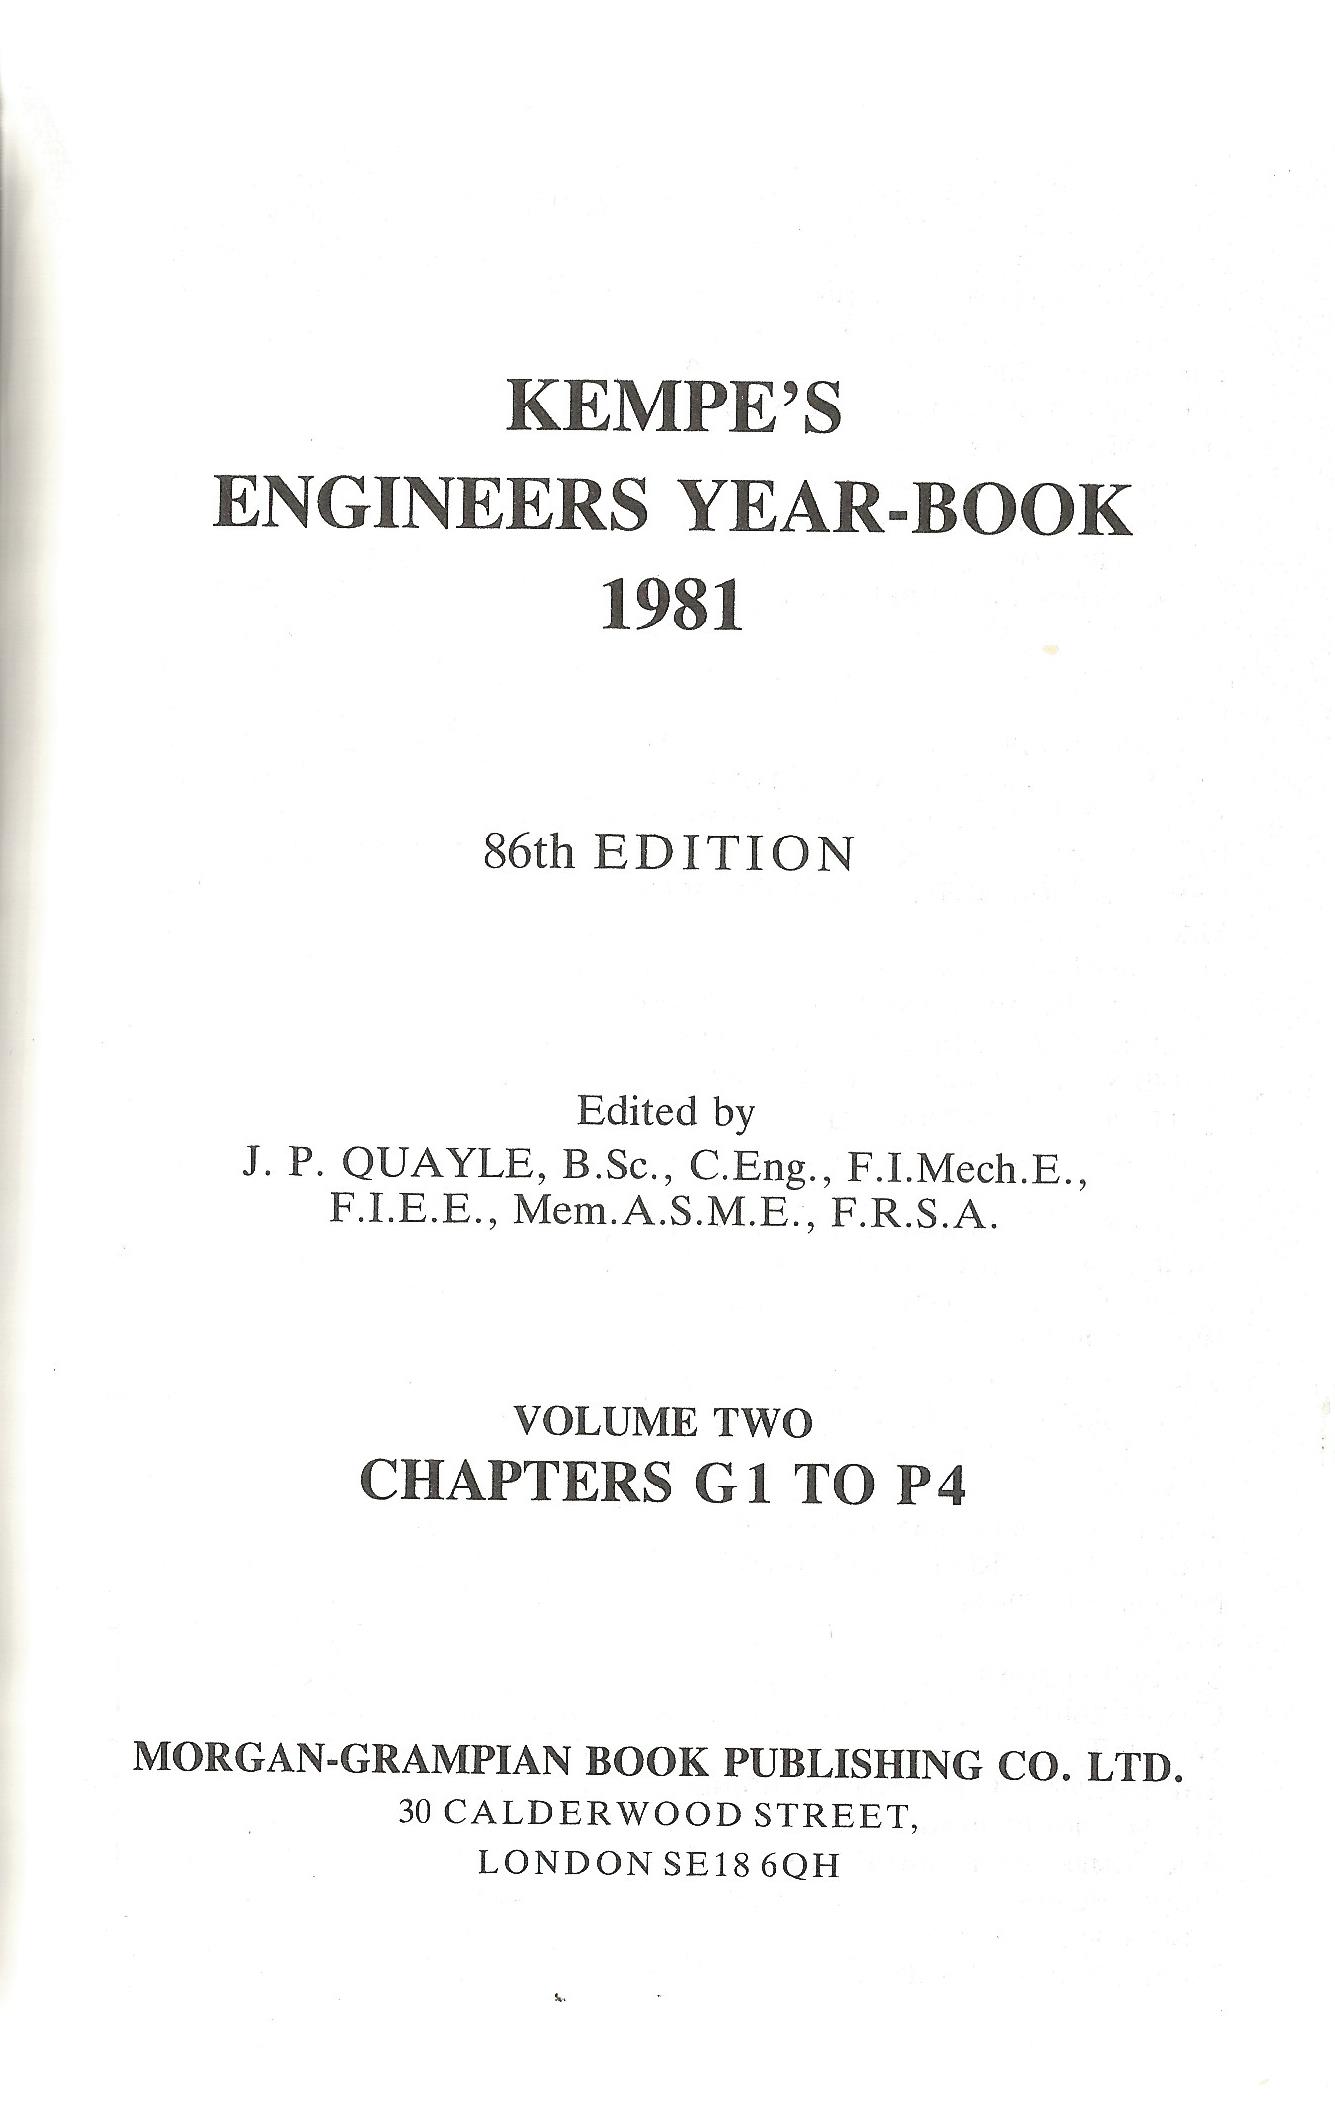 2 x Kempe's Engineers Year-Book 1981 86th edition published by Morgan-Grampian book publishing Co - Image 3 of 3